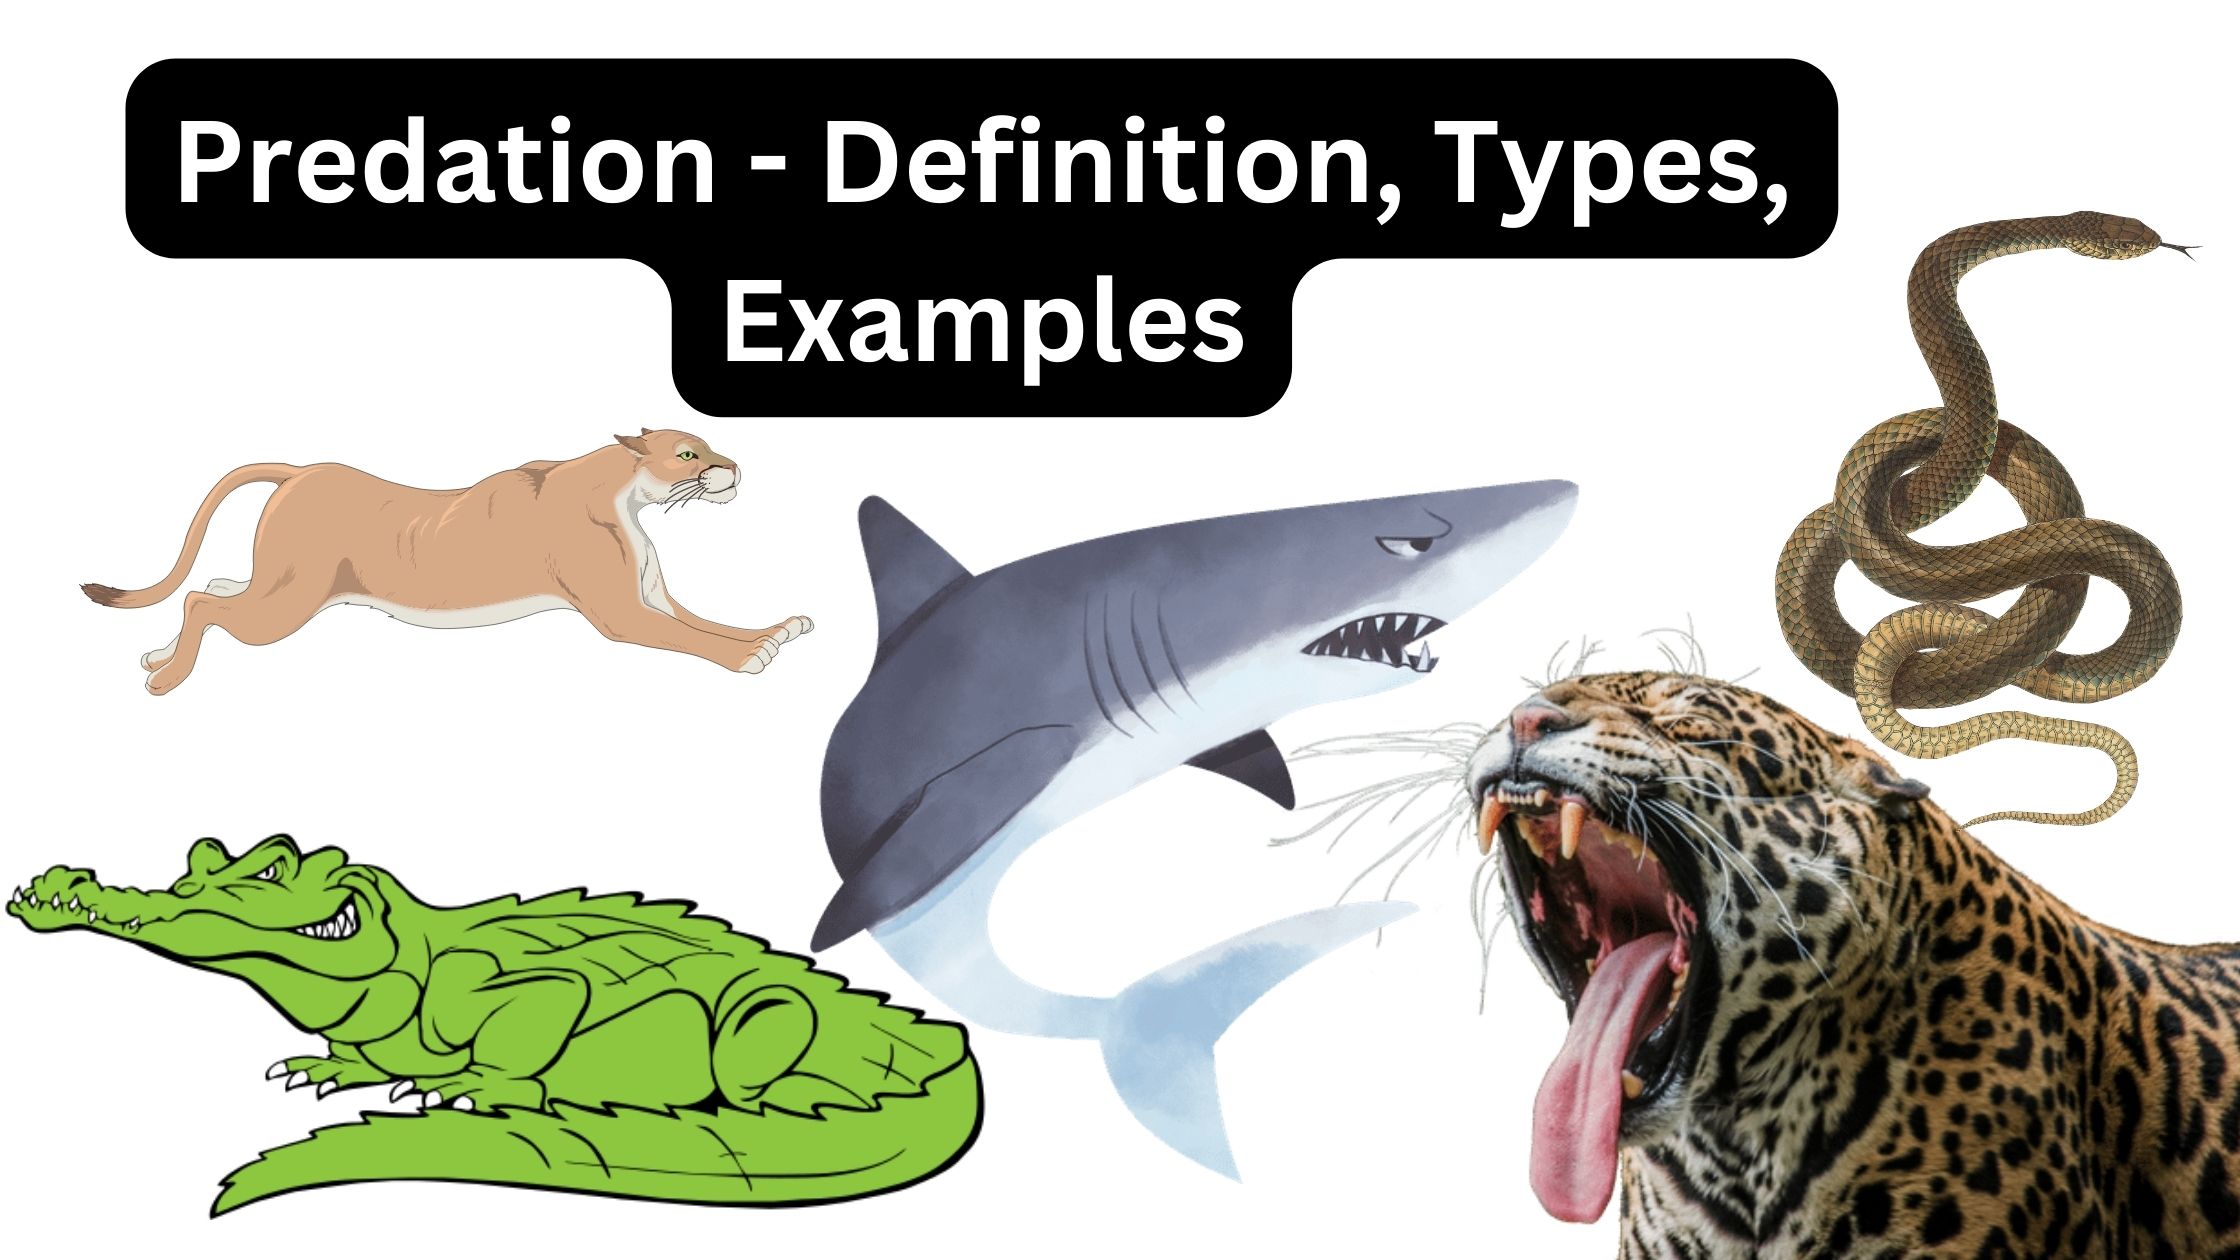 Predation - Definition, Types, Examples